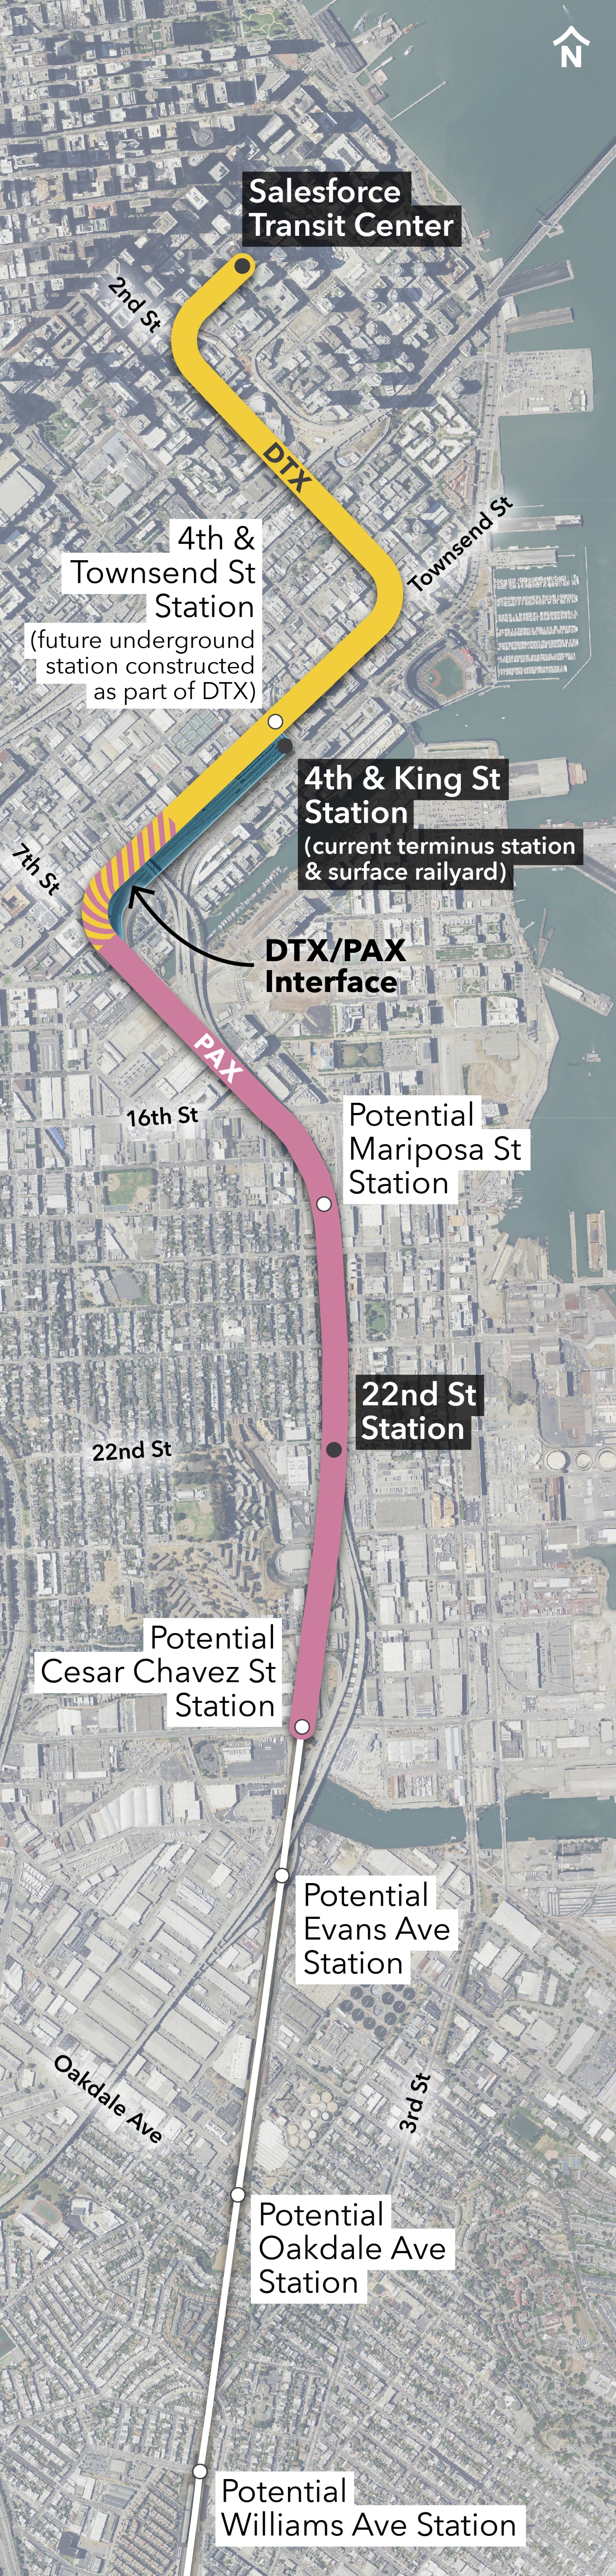 Map showing the Pennsylvania Avenue Extension project area from Cesar Chavez to the DTX/PAX Interface at the current Caltrain yard. The DTX project area continues North along Townsend to 2nd Street and the Salesforce Transit Center. Potential future stations are shown at 4th & Townsend (replacing the current 4th & King station), Mariposa Street, Cesar Chavez, Evans Avenue, Oakdale Avenue, and Williams Avenue.